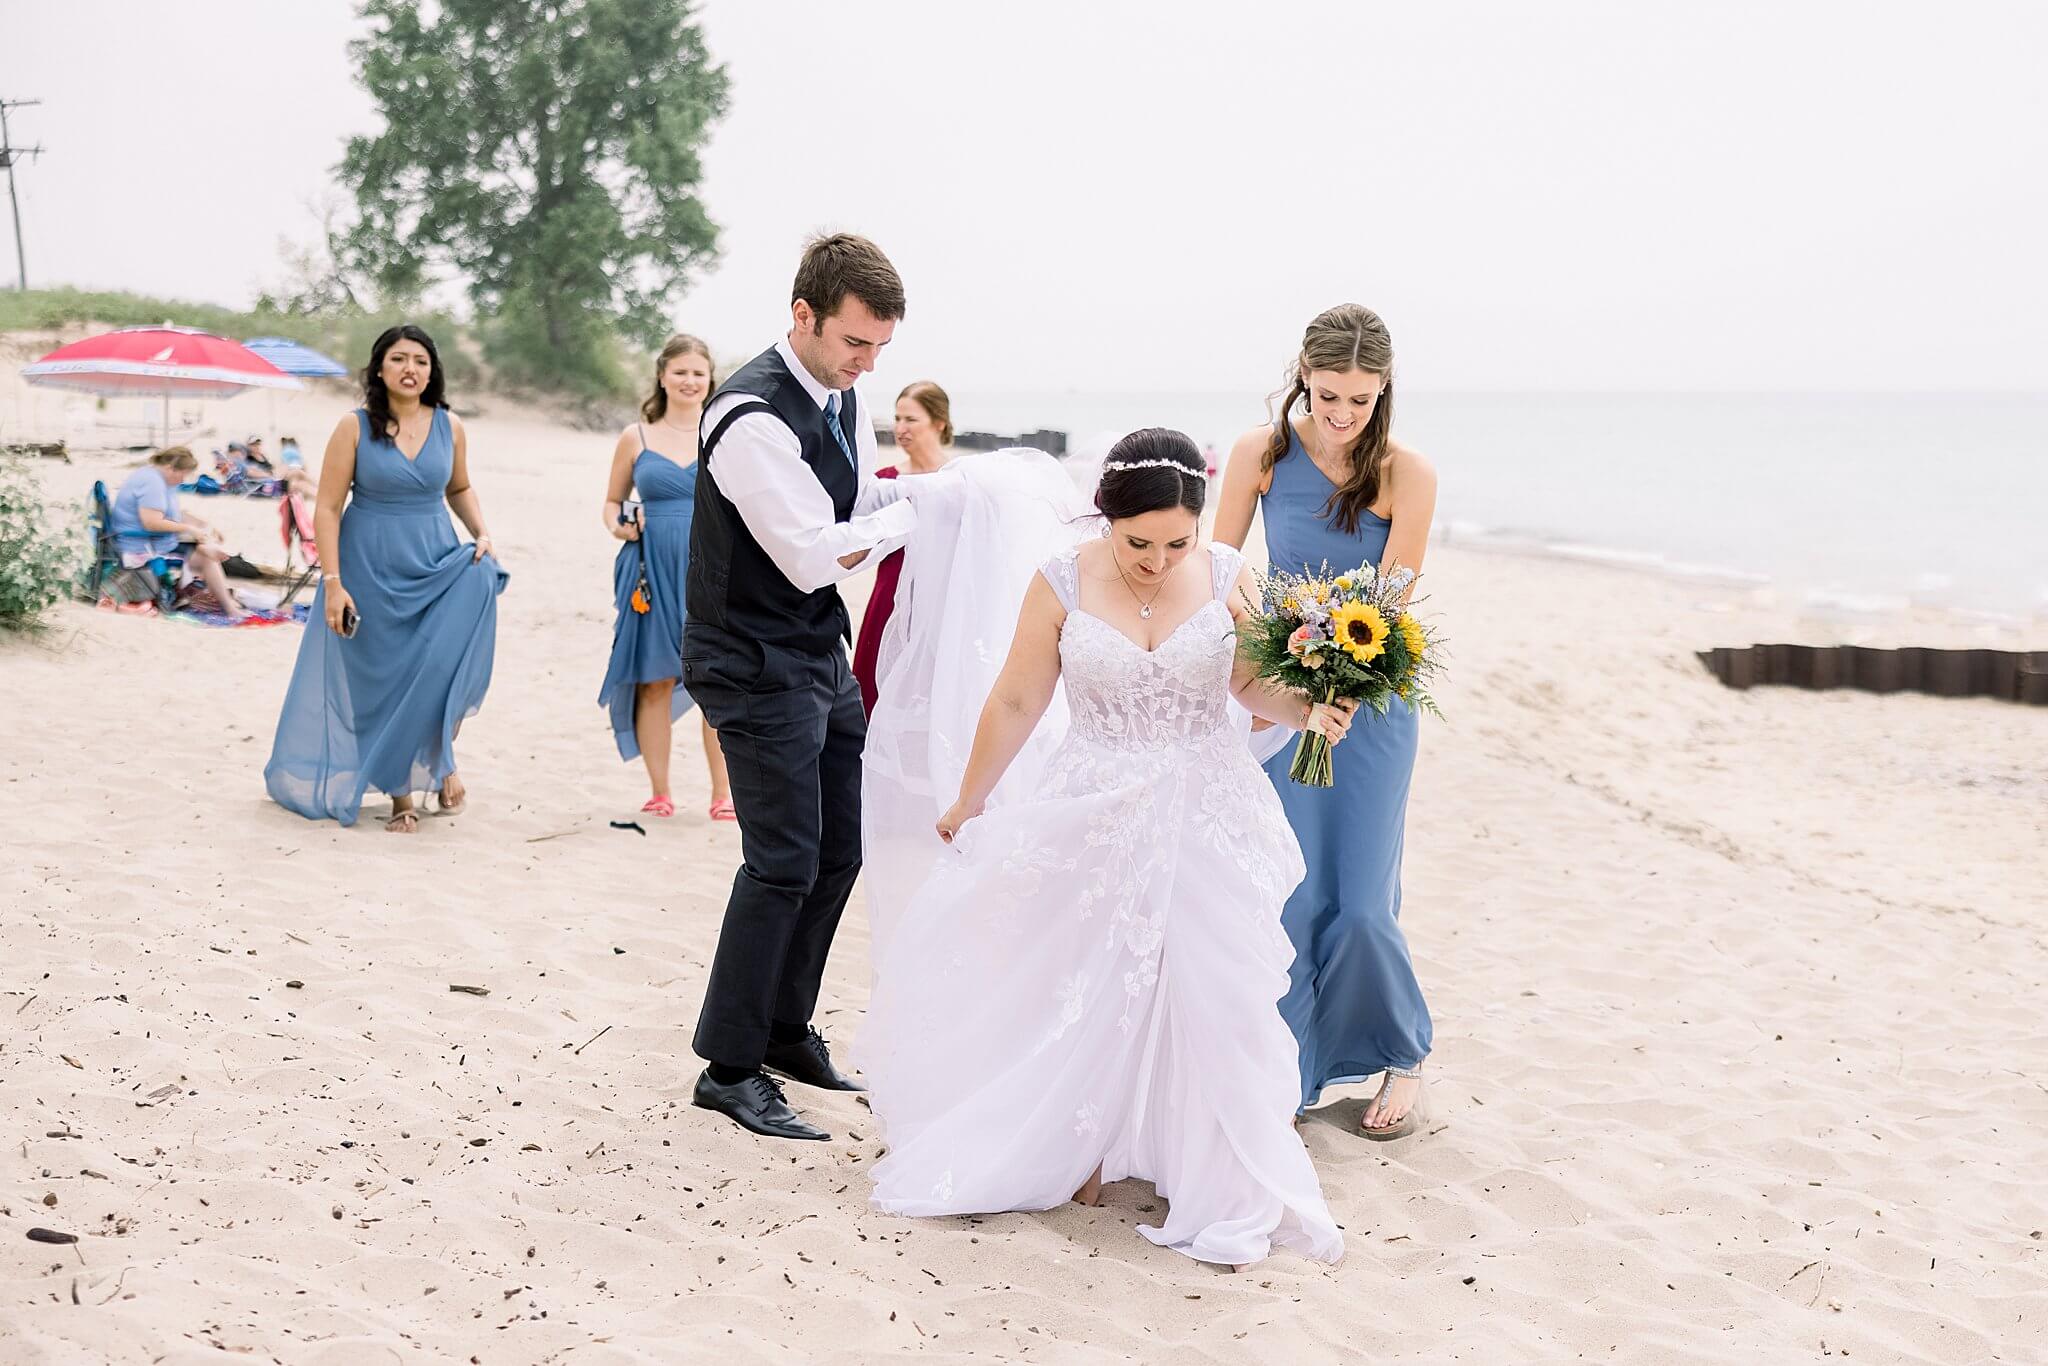 Bridal party helps bride make her way to the groom on the beach before their Elberta Life Saving Station wedding day.